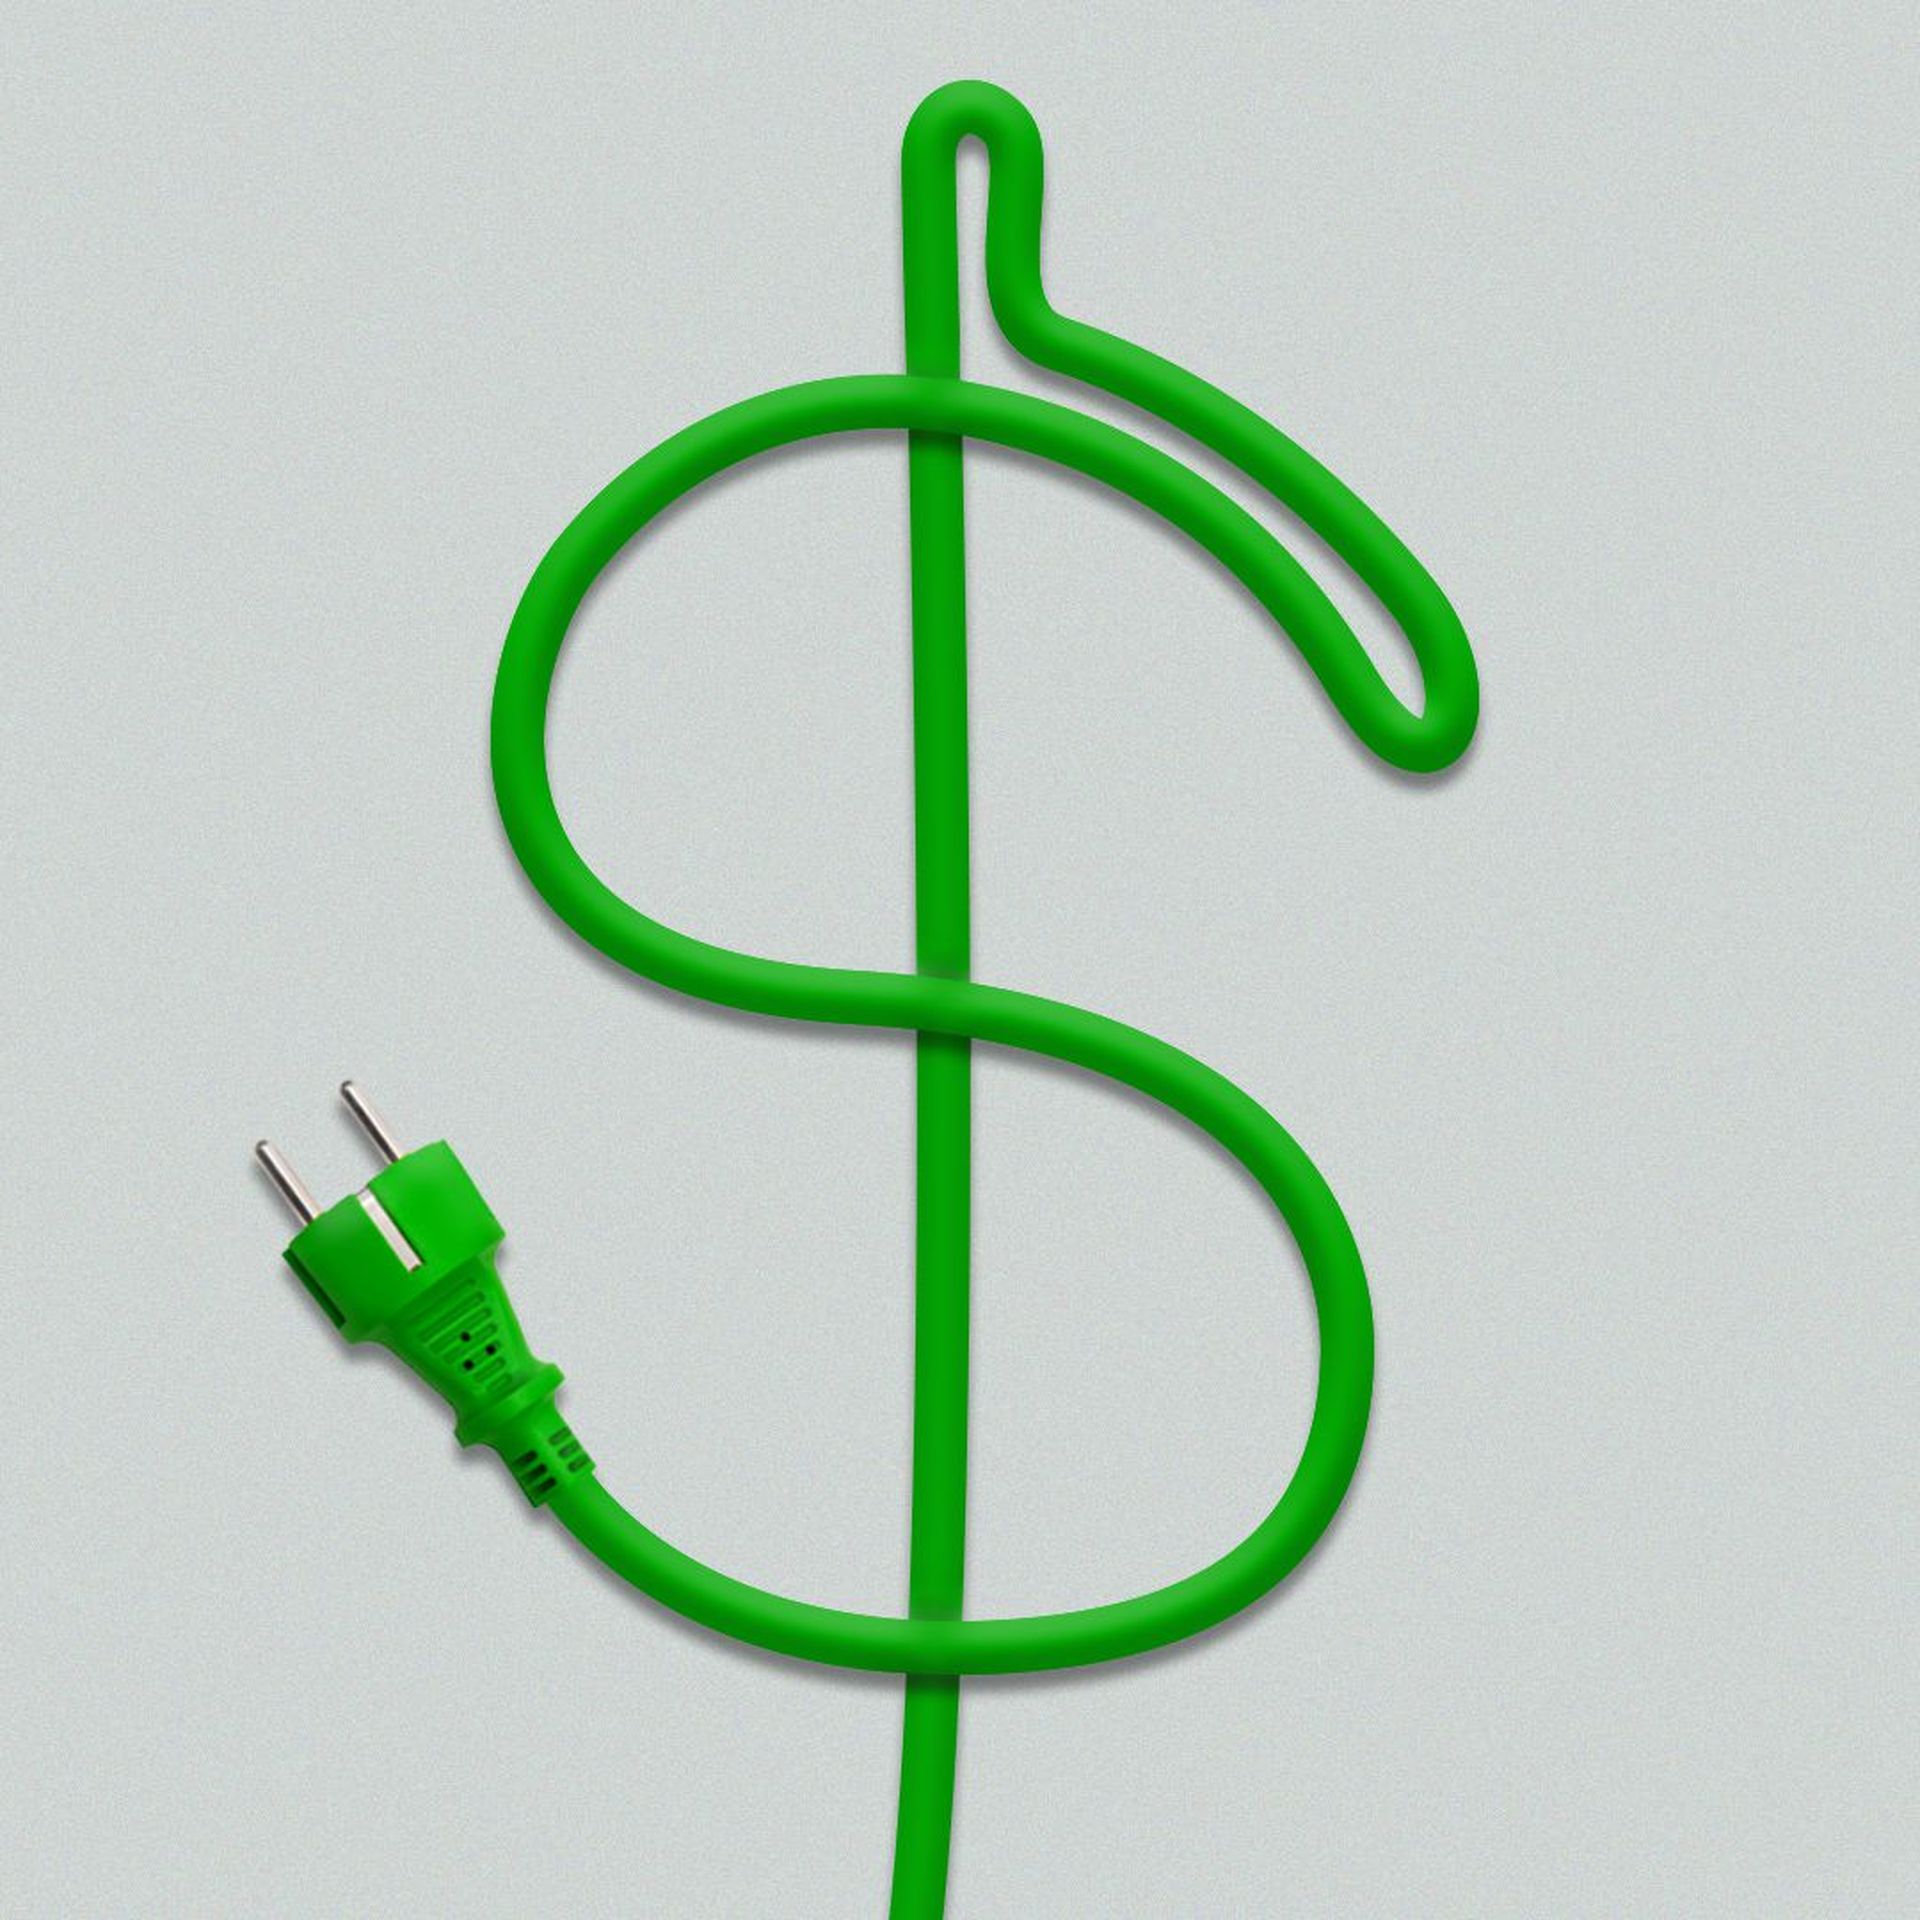 Illustration of an electrical plug and cord forming the shape of a dollar sign.